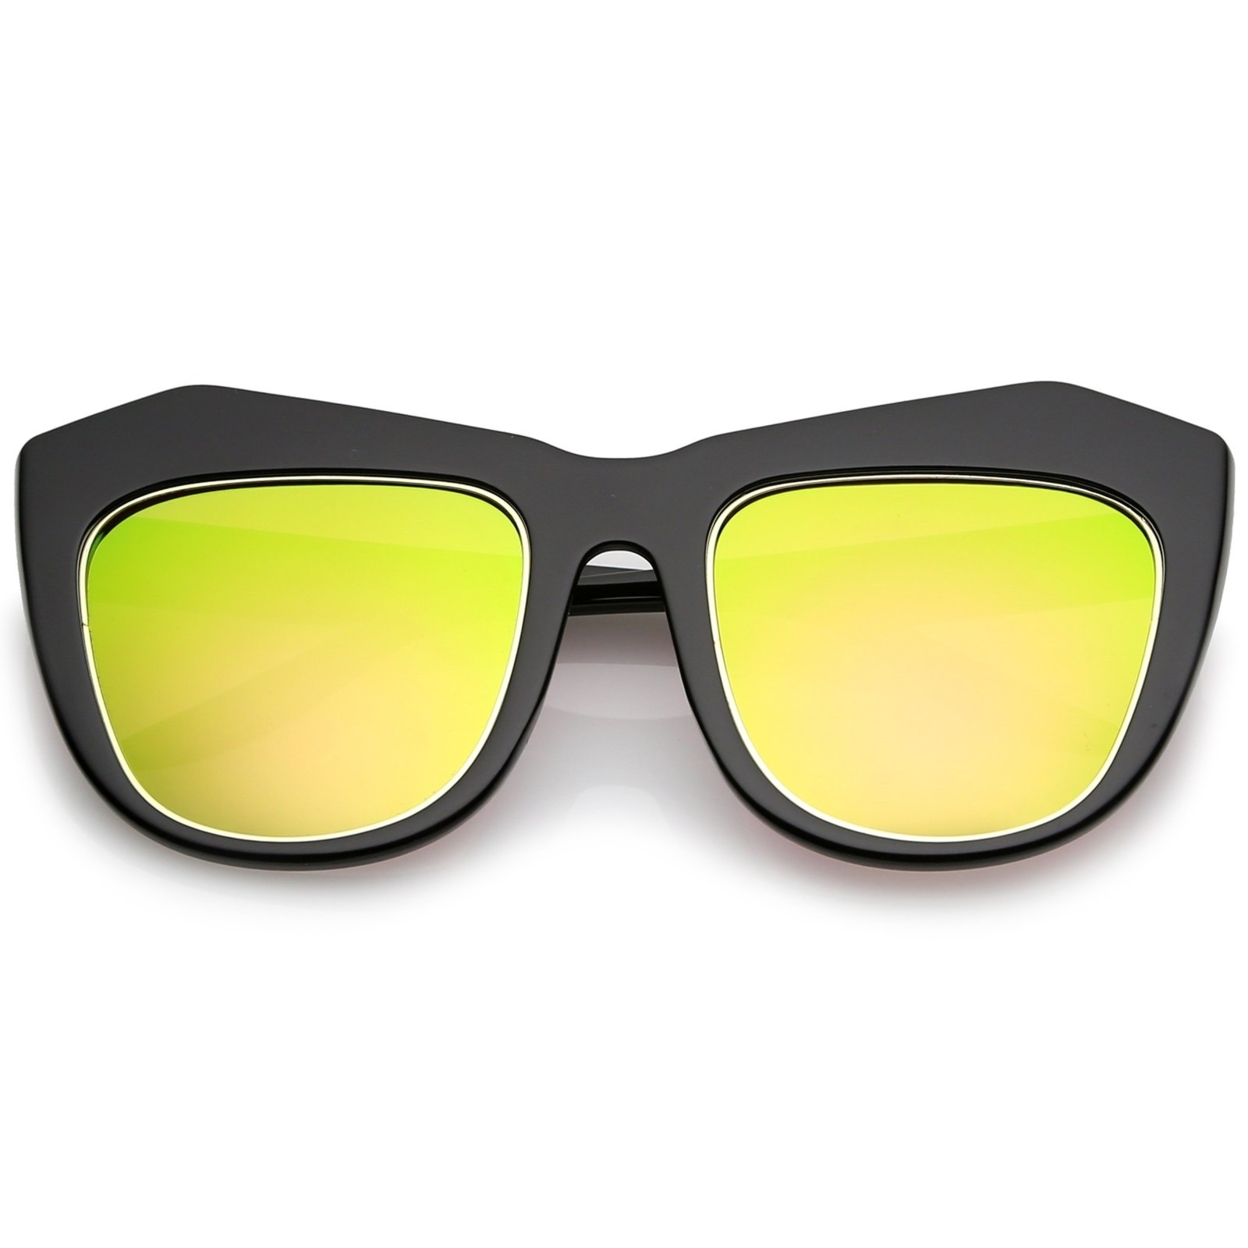 Oversize Chunky Frame Square Colored Mirror Lens Cat Eye Sunglasses 56mm - Black / Pink-Yellow Mirror